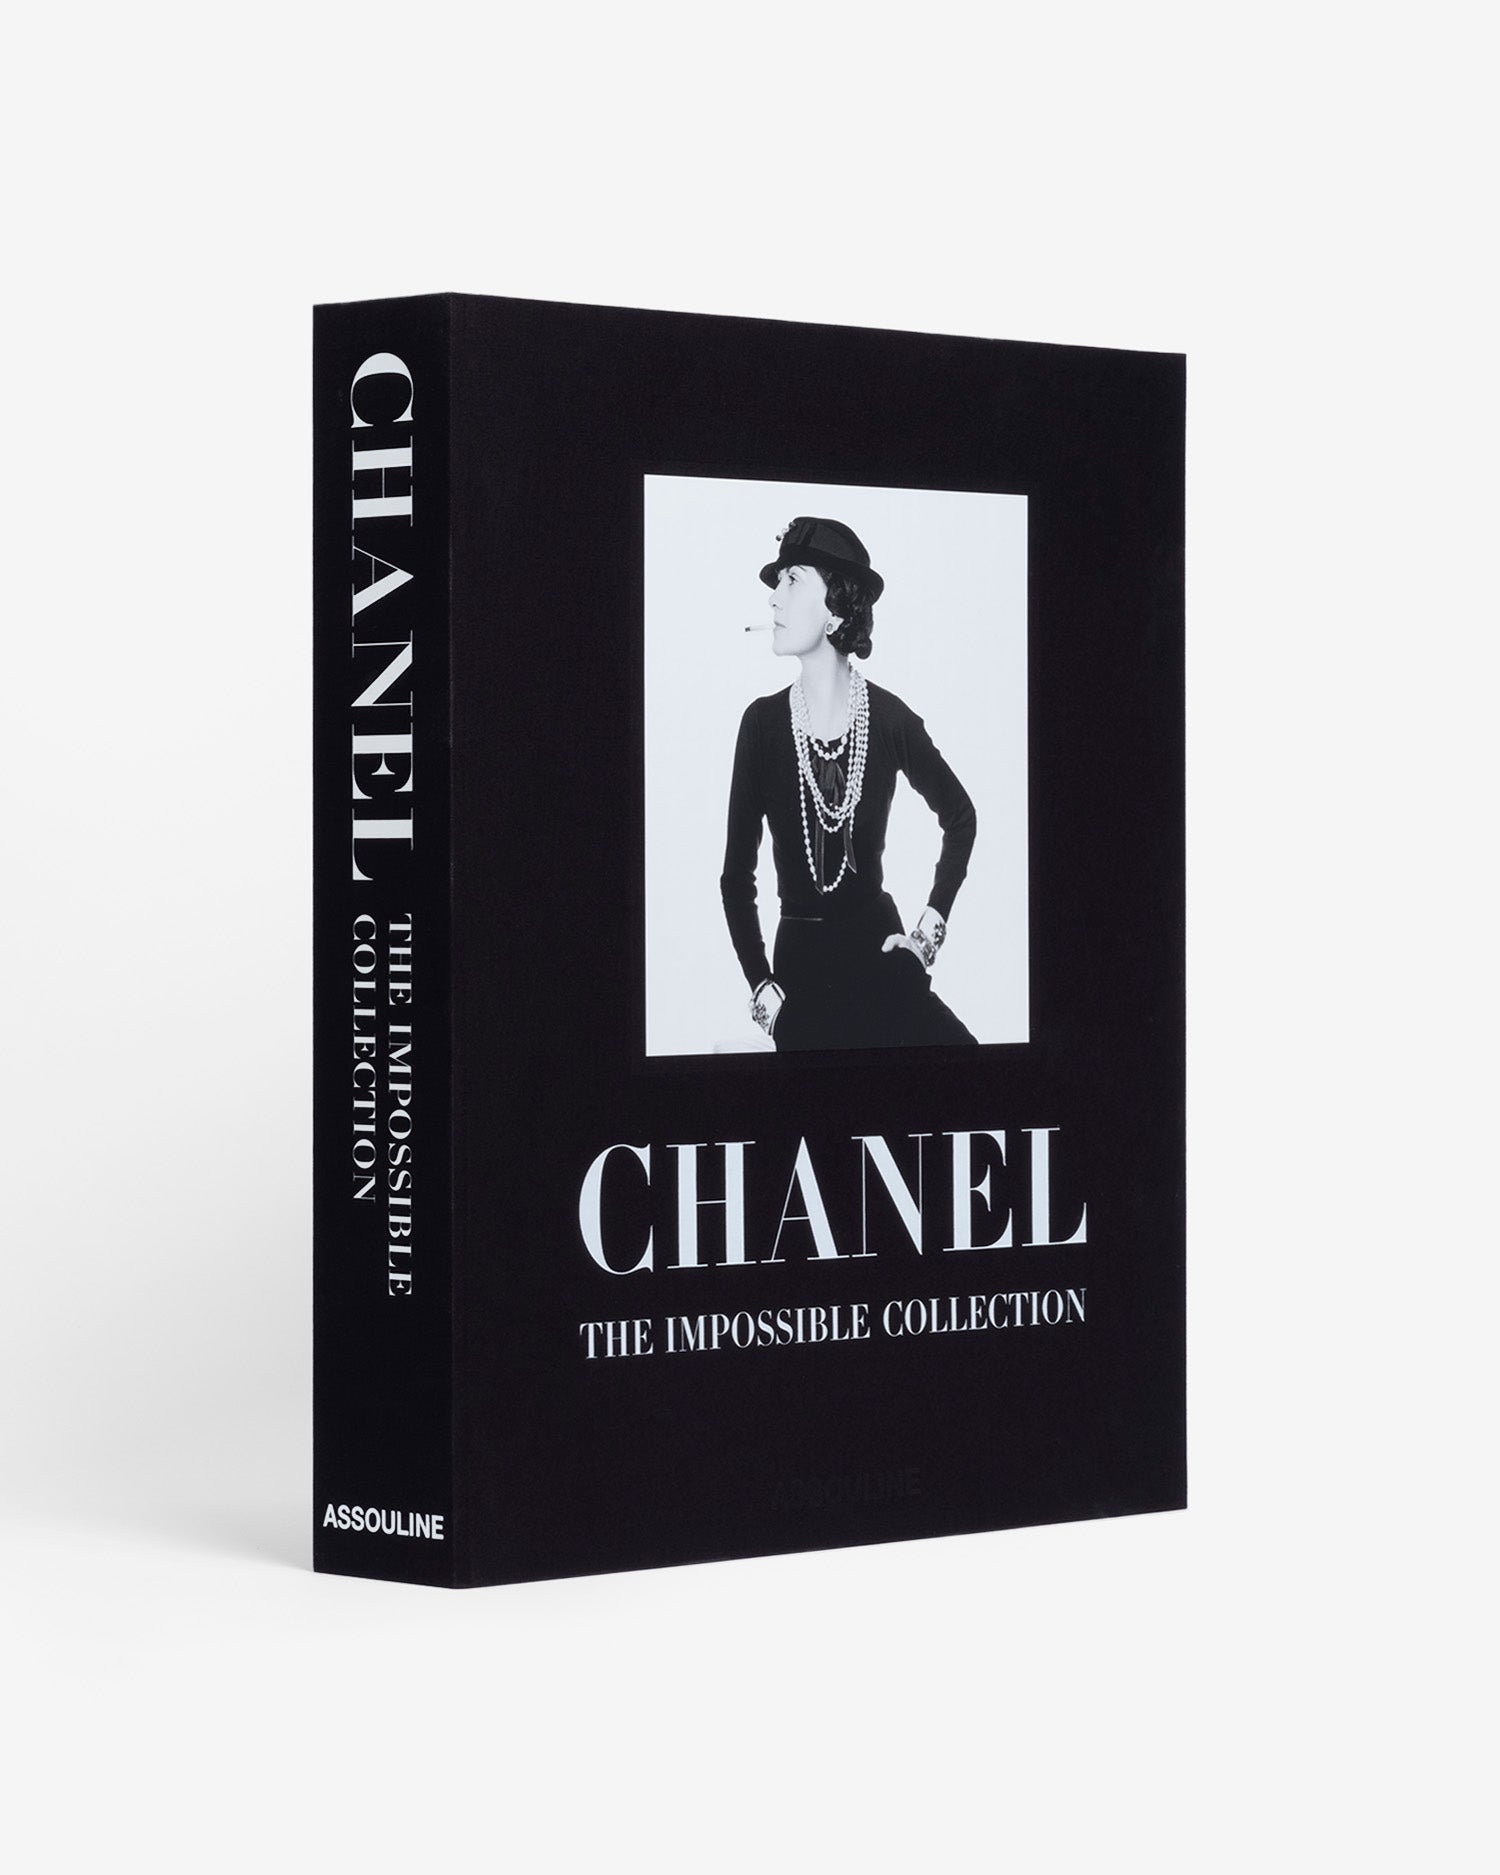 Chanel: The Impossible Collection book by Alexander Fury - Assouline